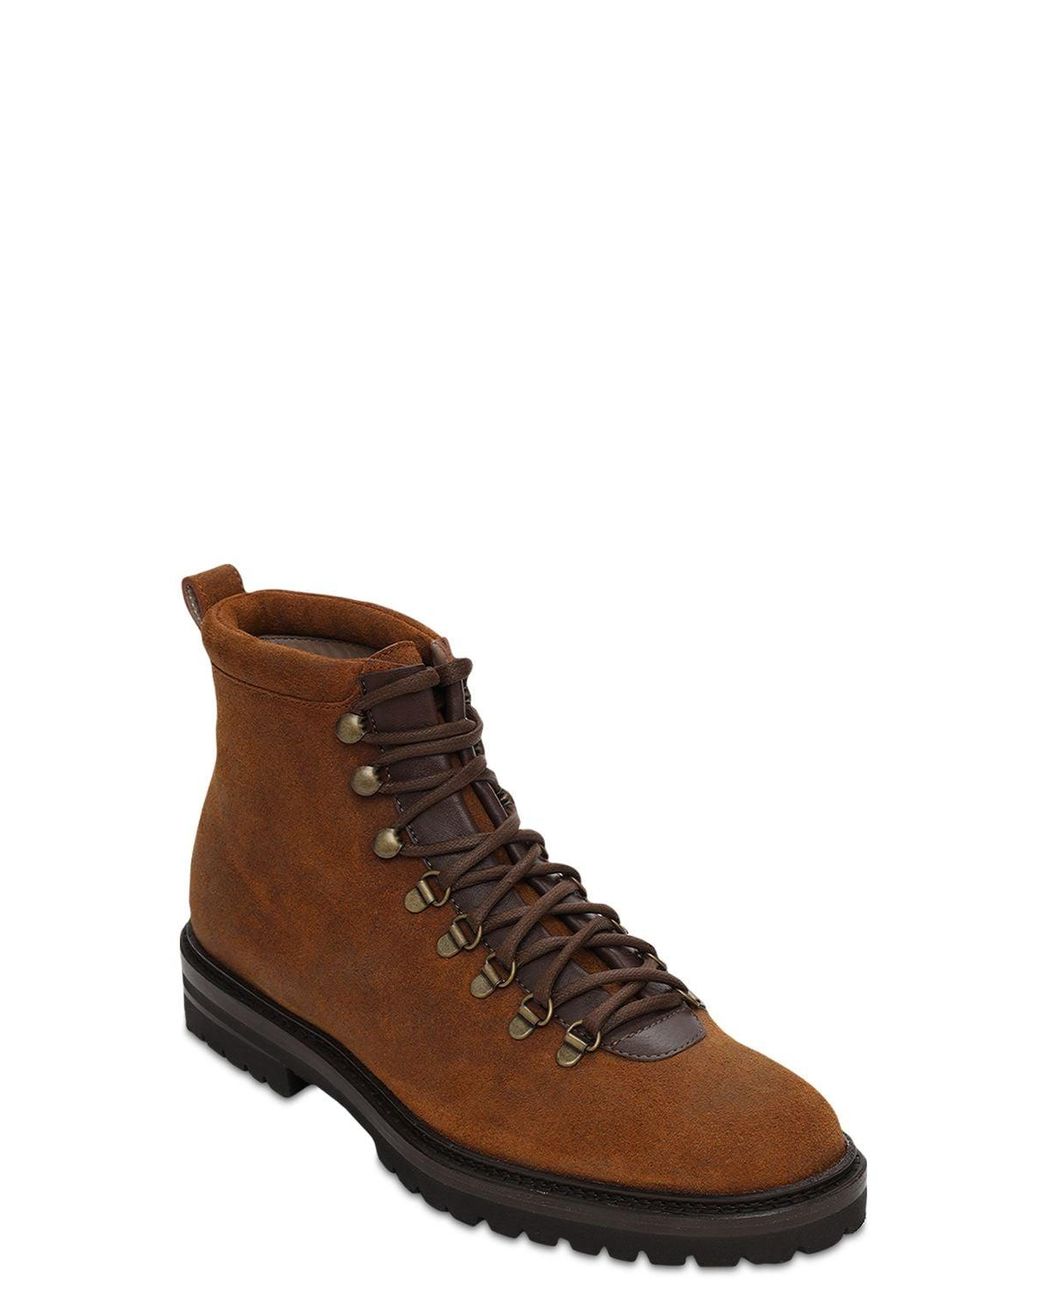 Luisaviaroma Men Shoes Outdoor Shoes Calaurio Leather Hiking Boots 